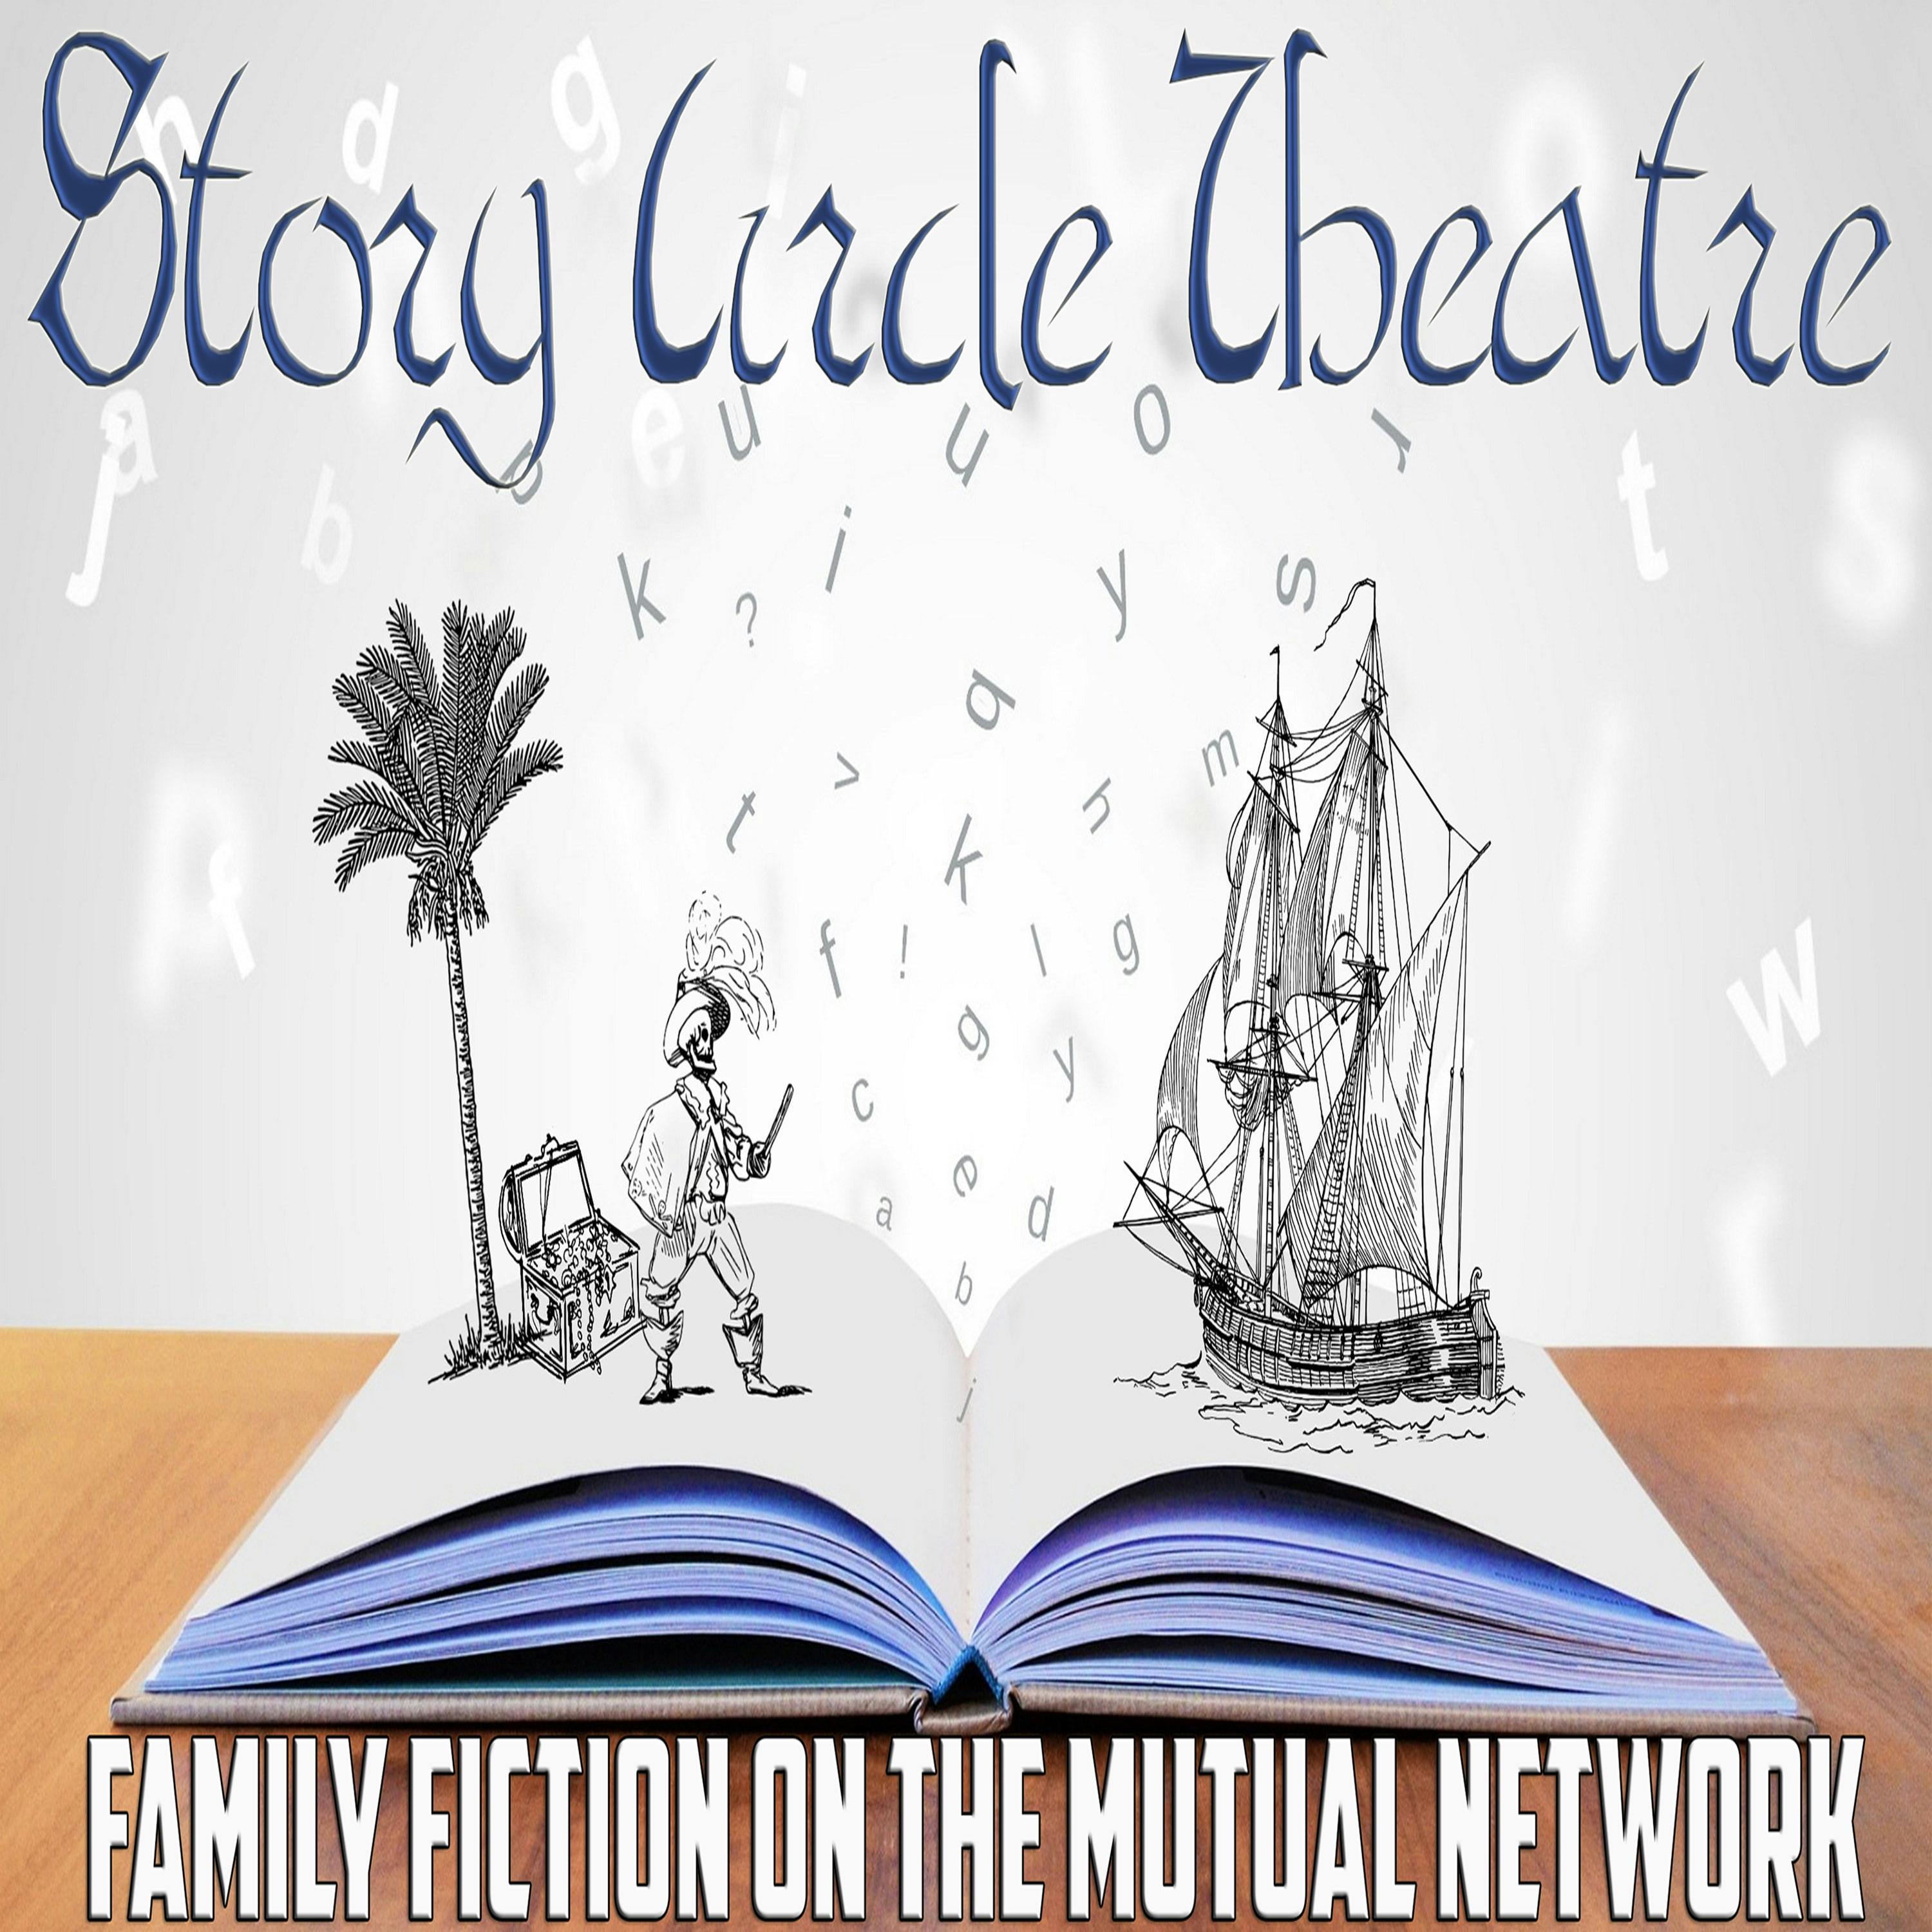 Story Circle Theater #3.15- The Sunbeam and the Snowdrop